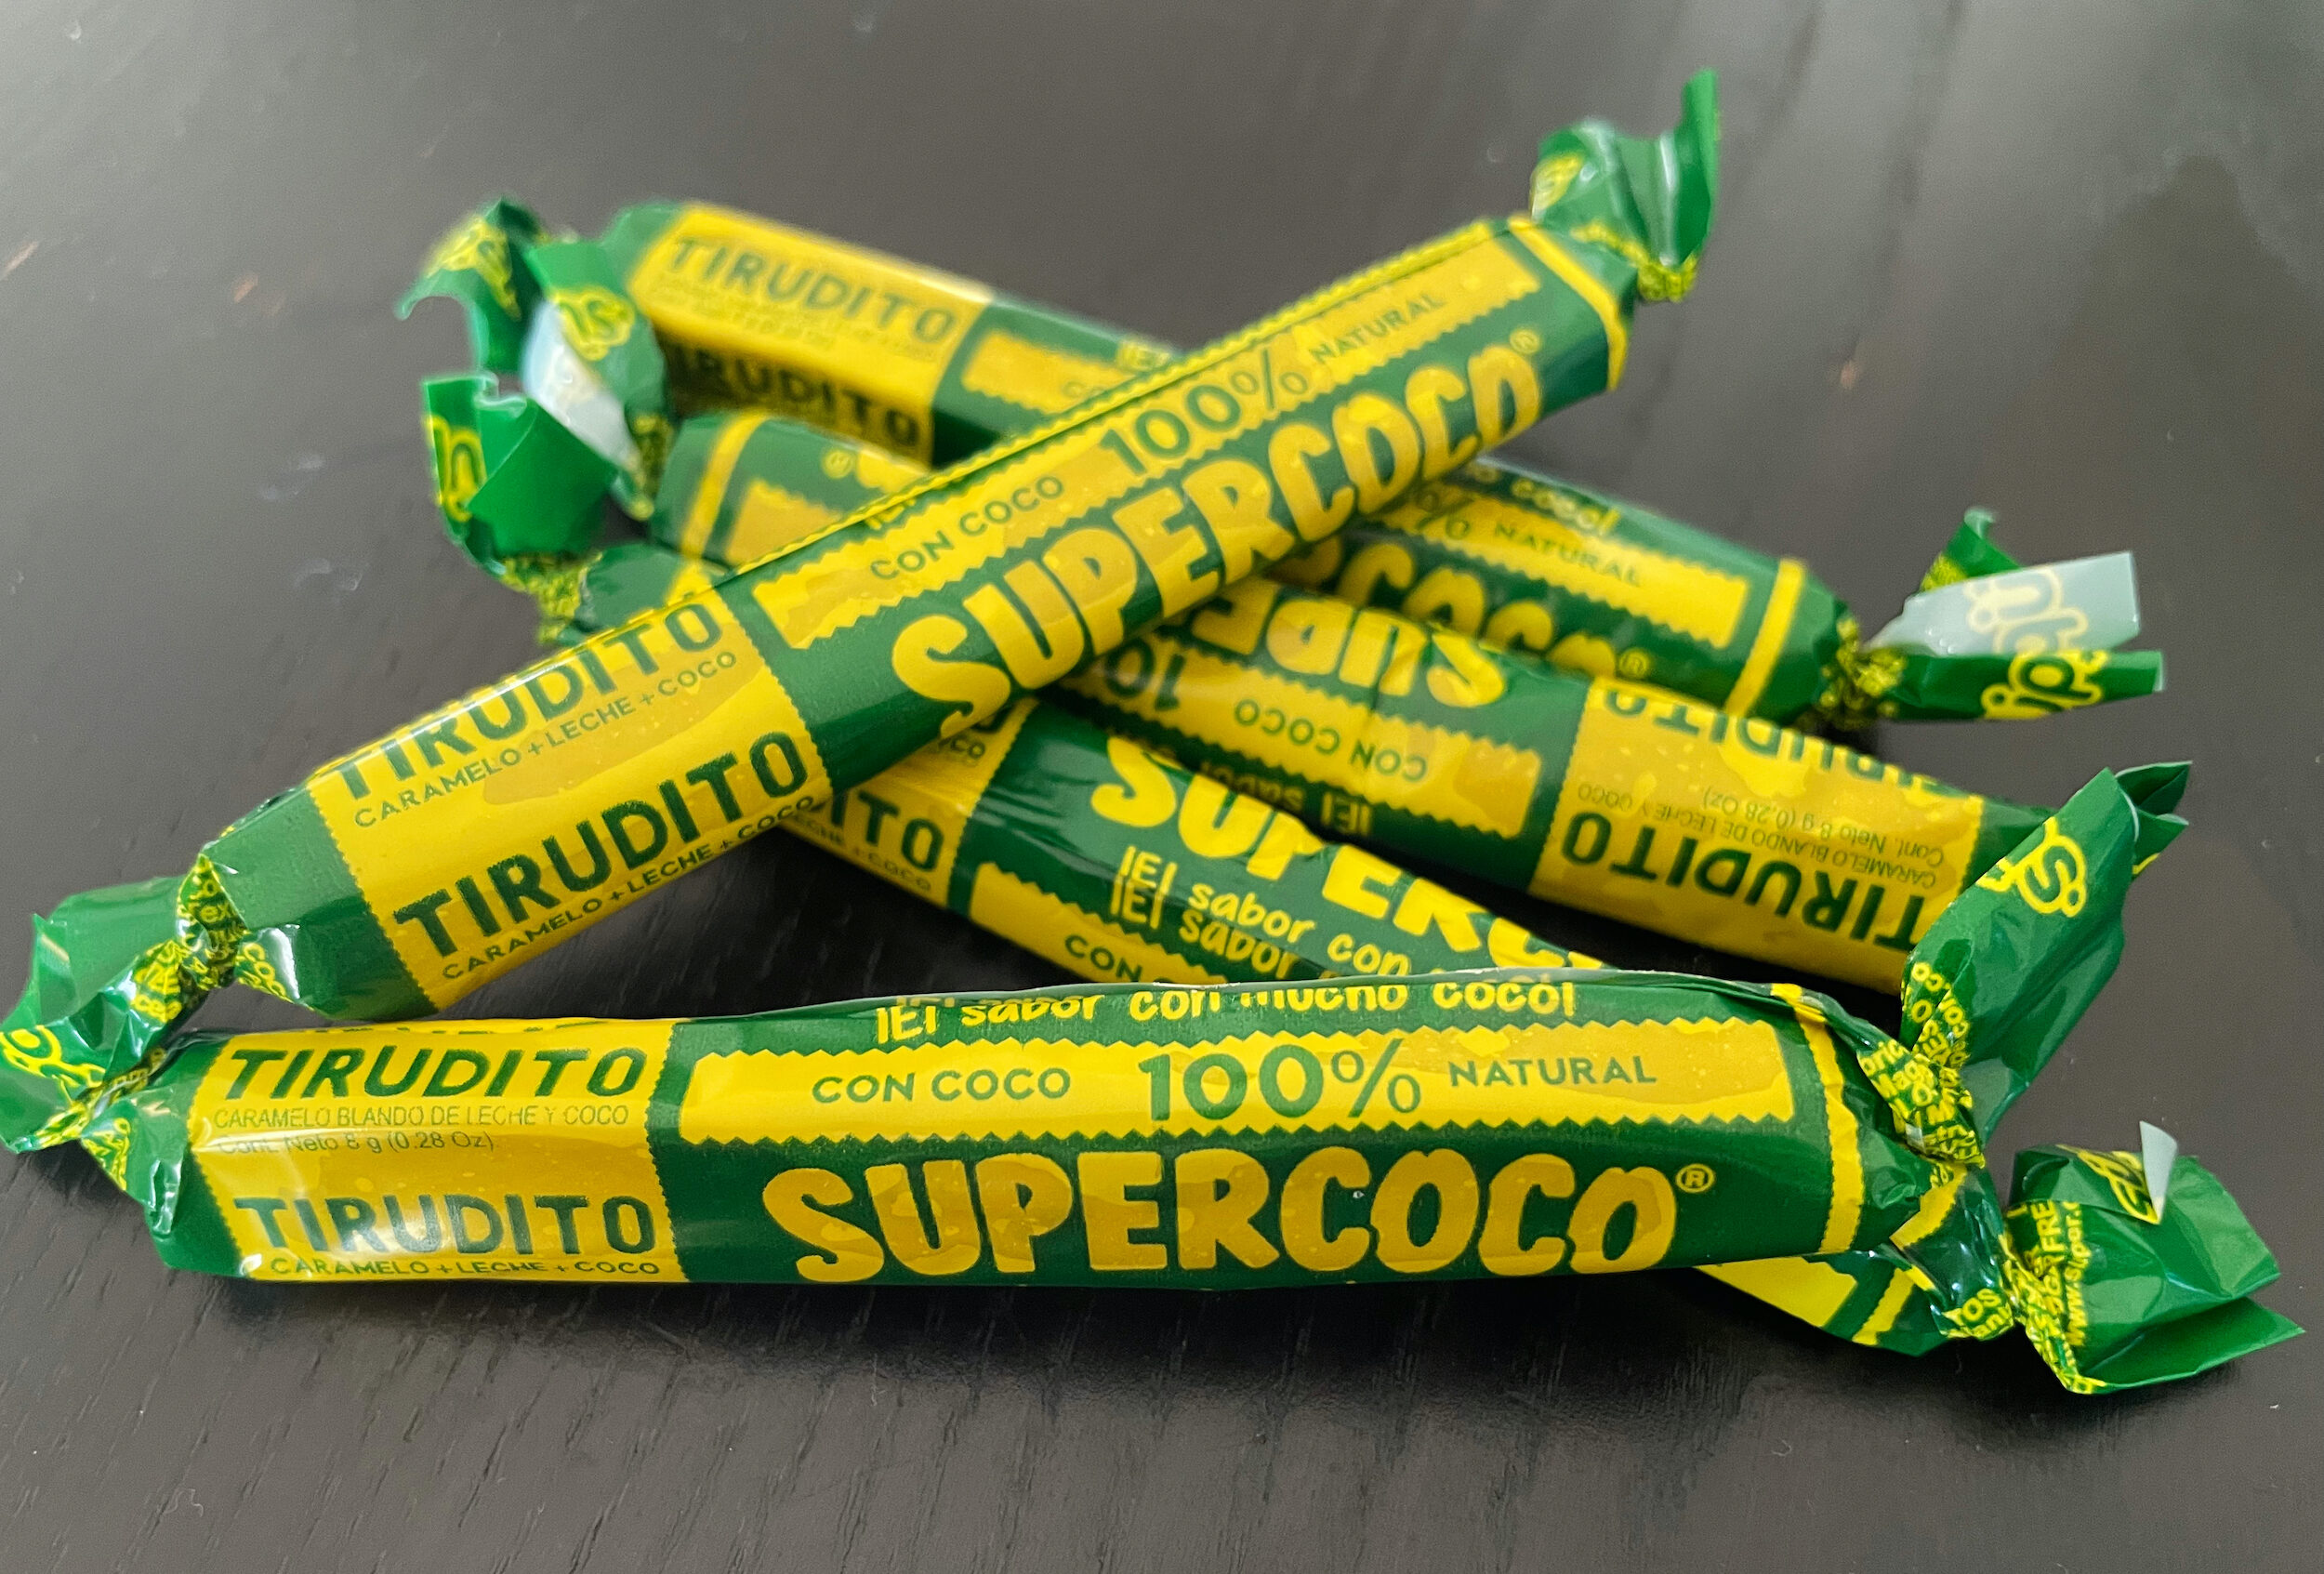 Supercoco Turron Candies in a Pile